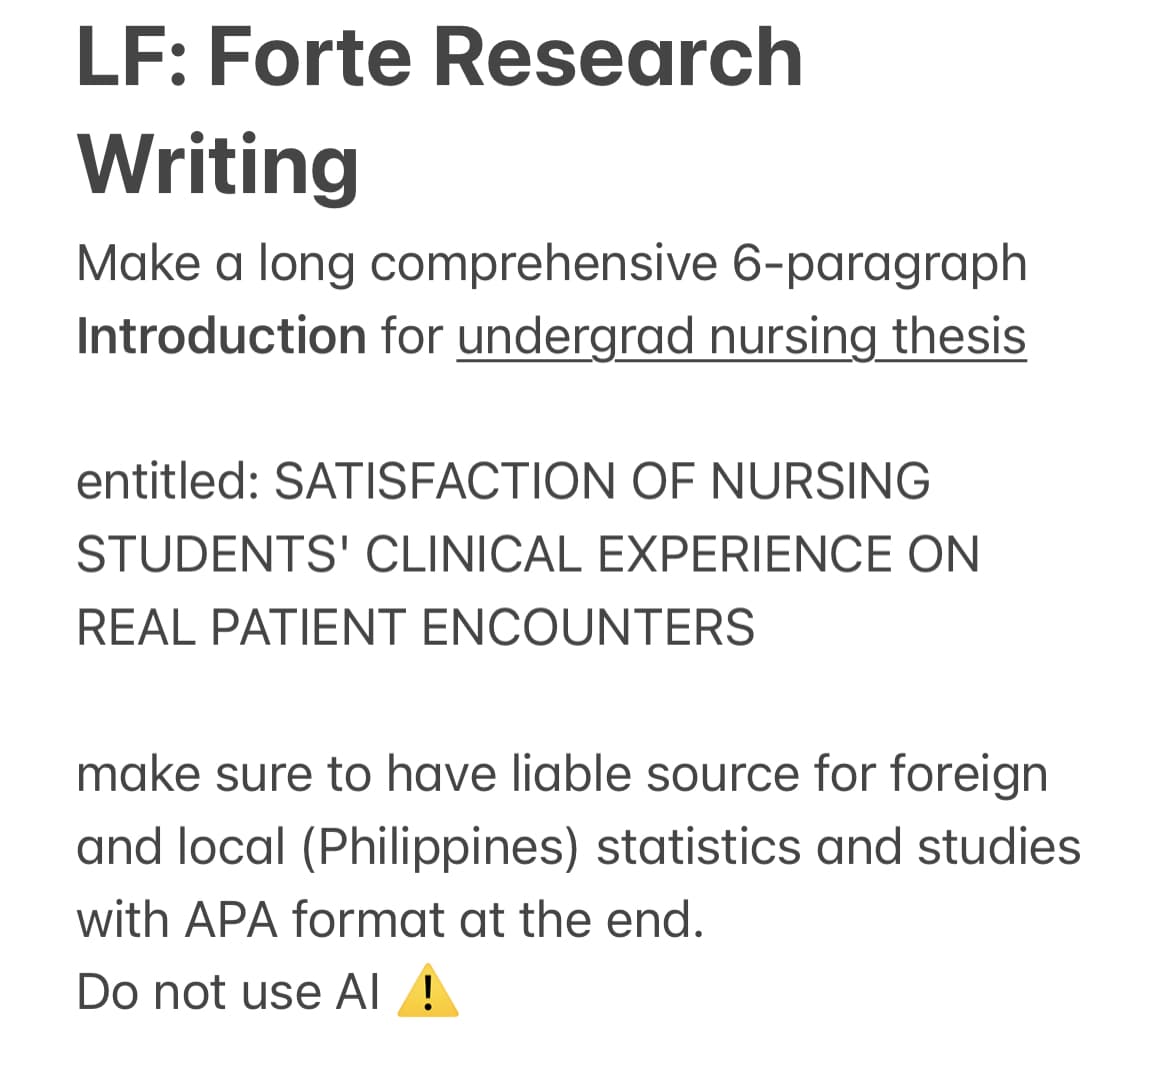 LF: Forte Research
Writing
Make a long comprehensive 6-paragraph
Introduction for undergrad nursing thesis
entitled:SATISFACTION OF NURSING
STUDENTS' CLINICAL EXPERIENCE ON
REAL PATIENT ENCOUNTERS
make sure to have liable source for foreign
and local (Philippines) statistics and studies
with APA format at the end.
Do not use AI !